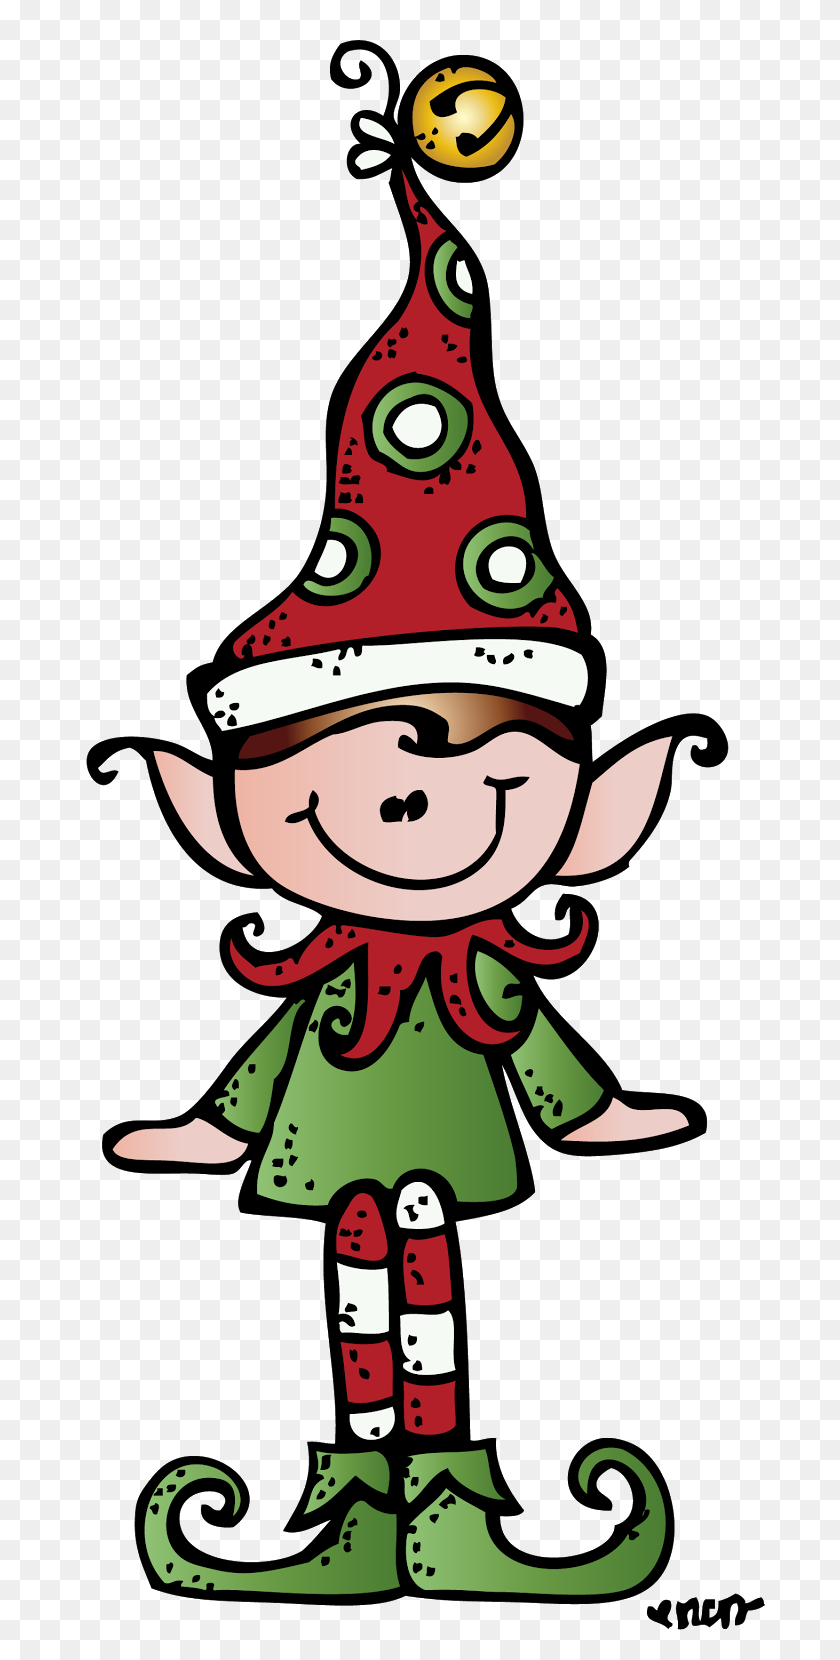 690x1600 Elf On The Shelf Clip Art Look At Elf On The Shelf Clip Art Clip - Melonheadz Christmas Clipart